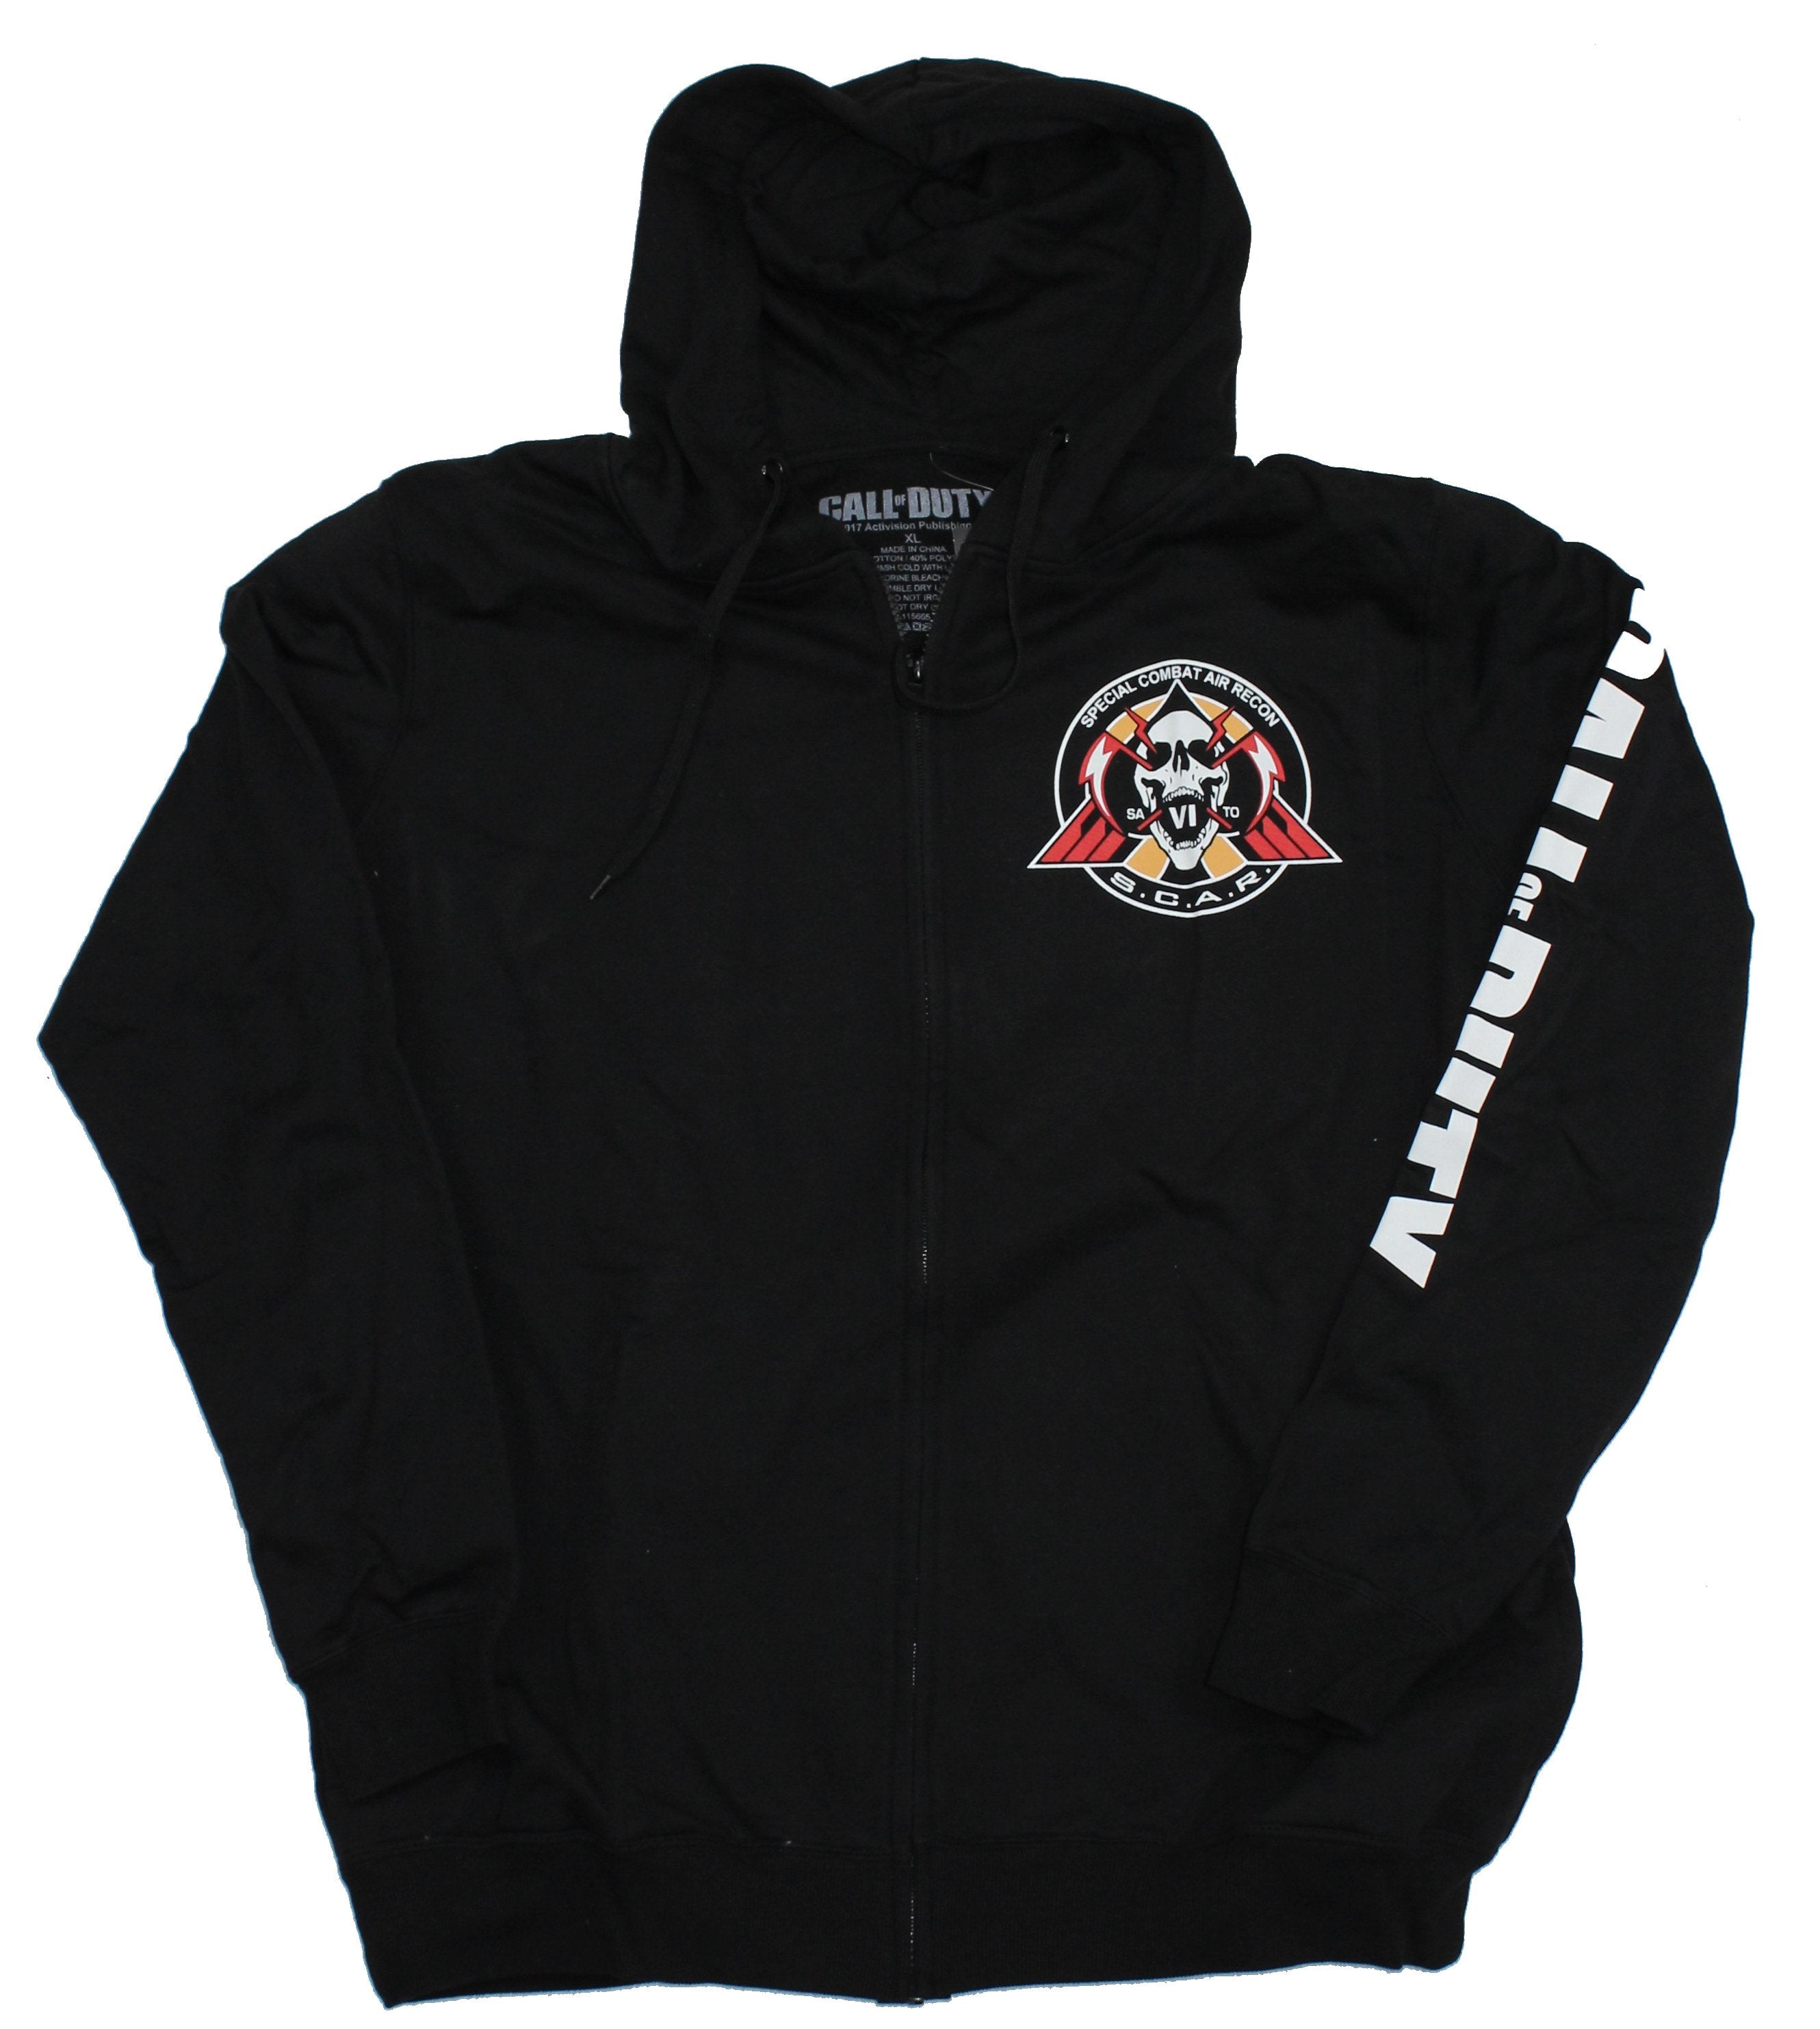 Call of Duty Zip Up Mens Hoodie - S.C.A.R.S. Skull logo Front & Back Image